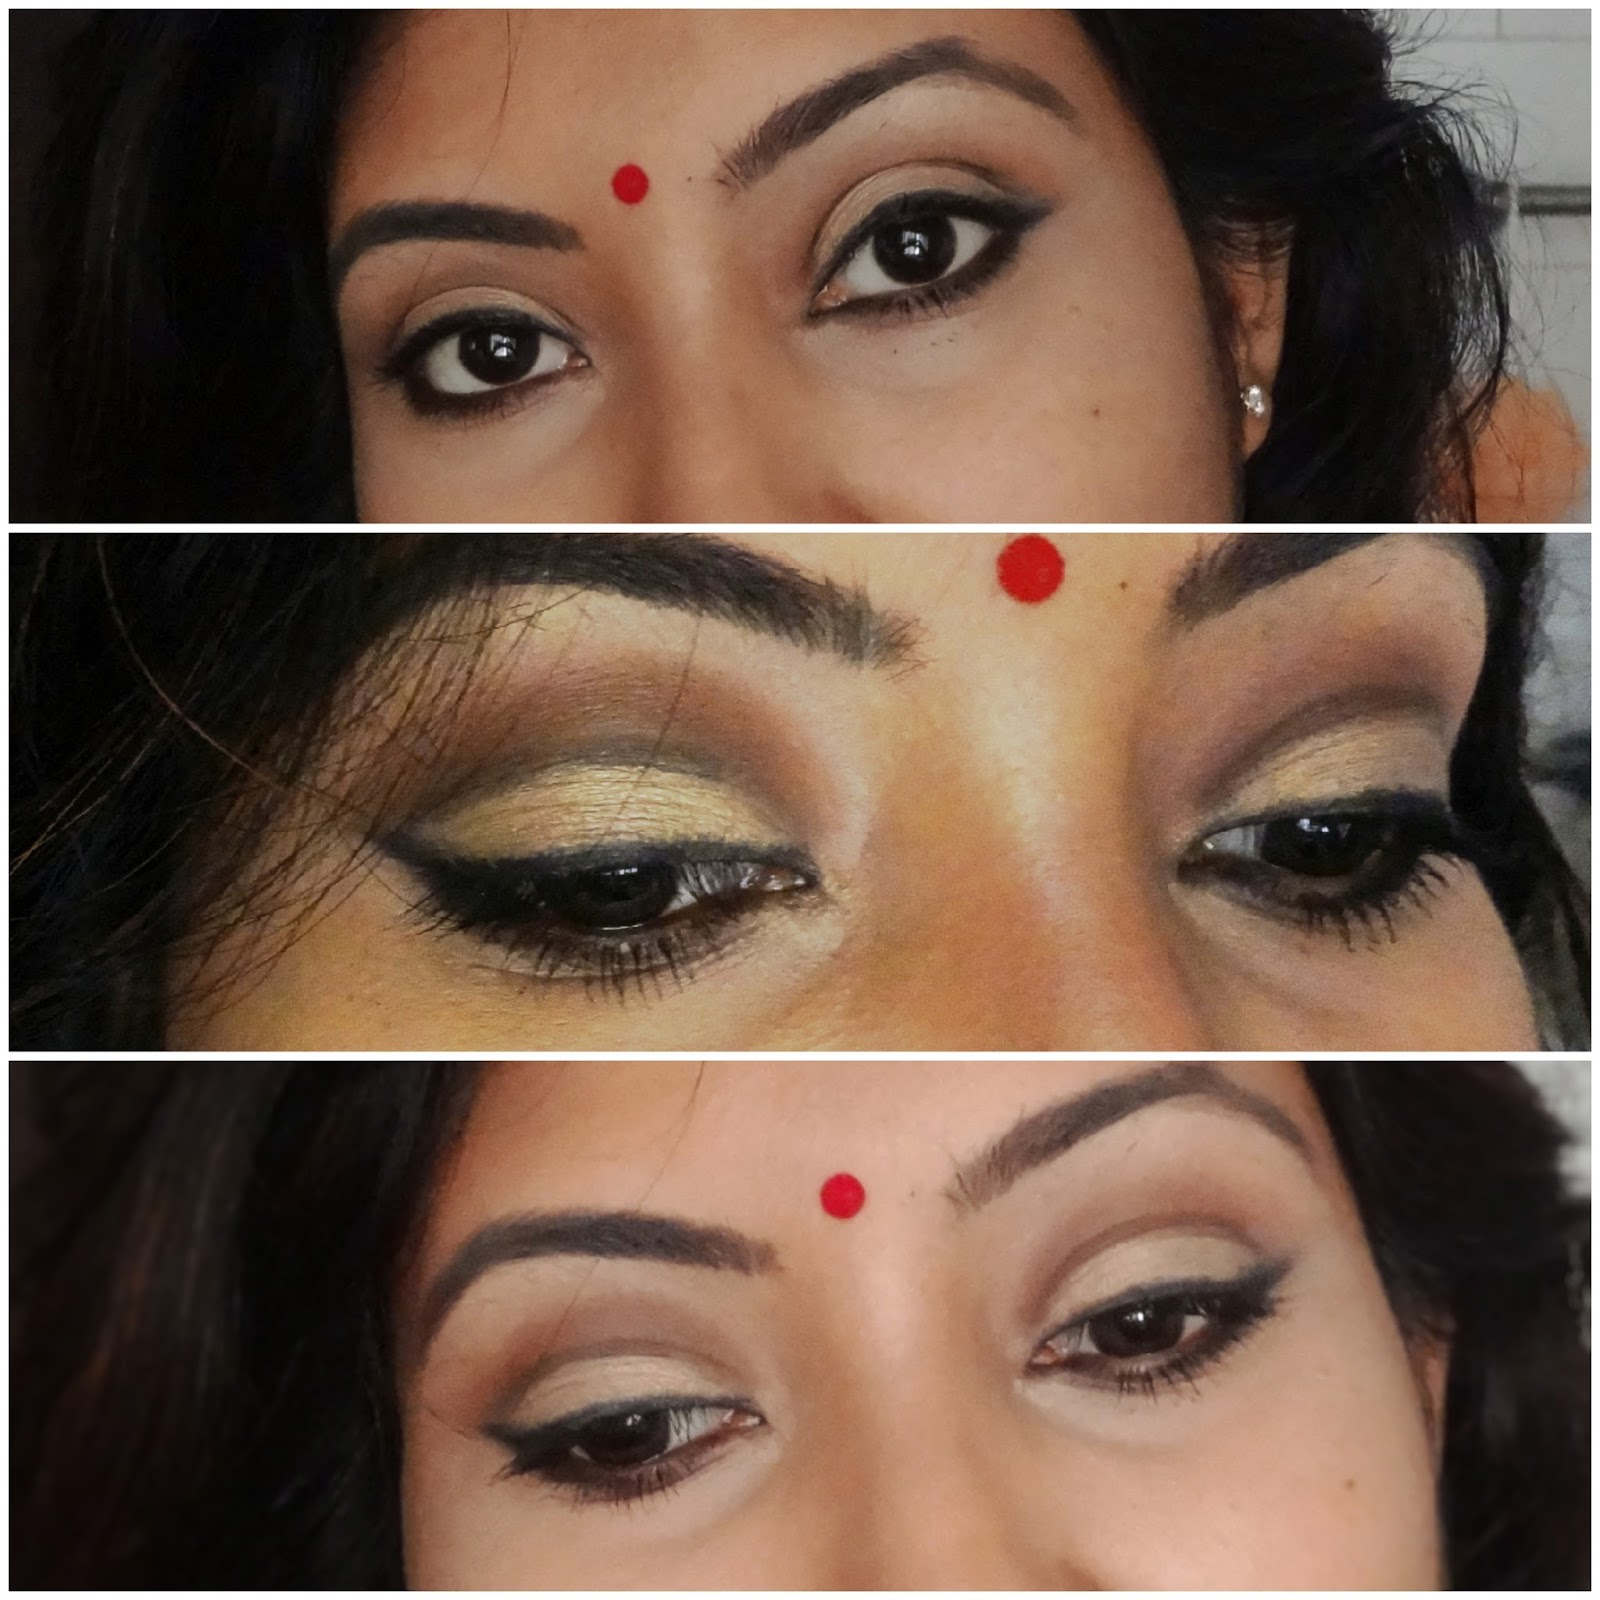 How To Do My Eye Makeup How To Do Cut Crease Eye Makeup Easy Step Step With Pictures My